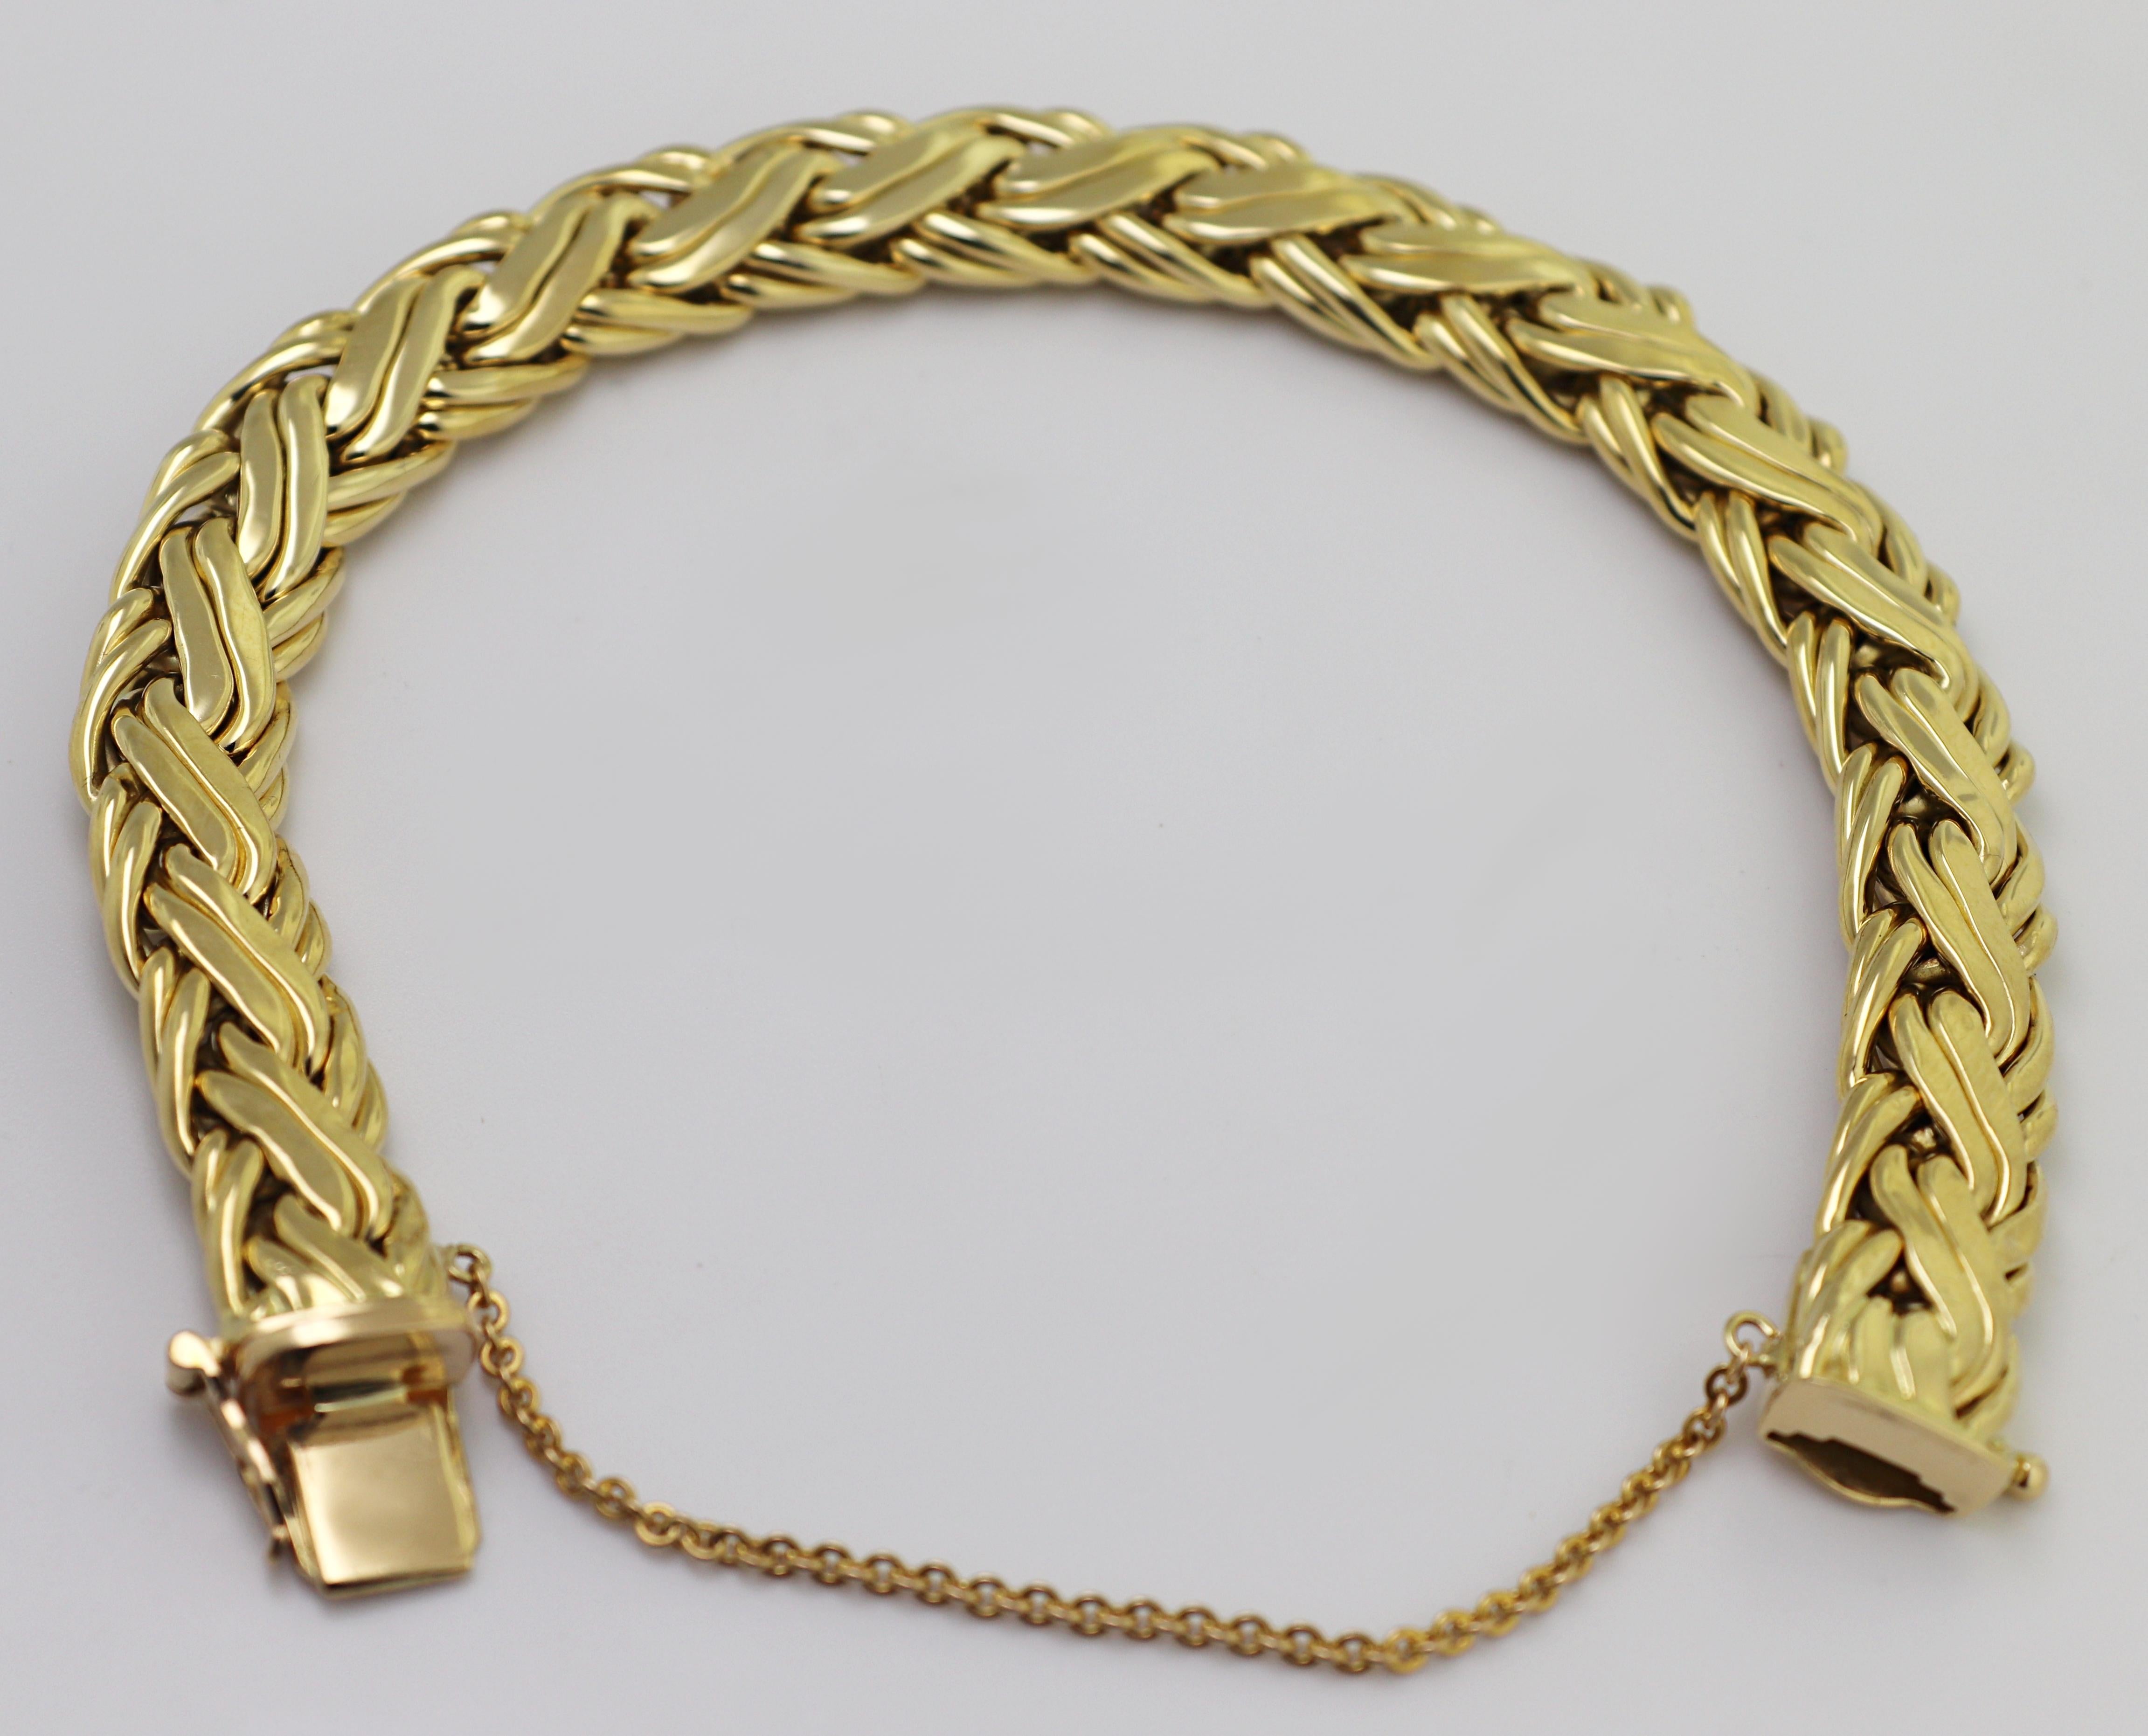 The 18k yellow gold woven link, 9.7 X 4.6 mm, completed by a box clasp,
with figure eight and safety chain, forming a 7.5-inch bracelet, marked
TIFFANY &Co., 750, Weight 33.57 grams.